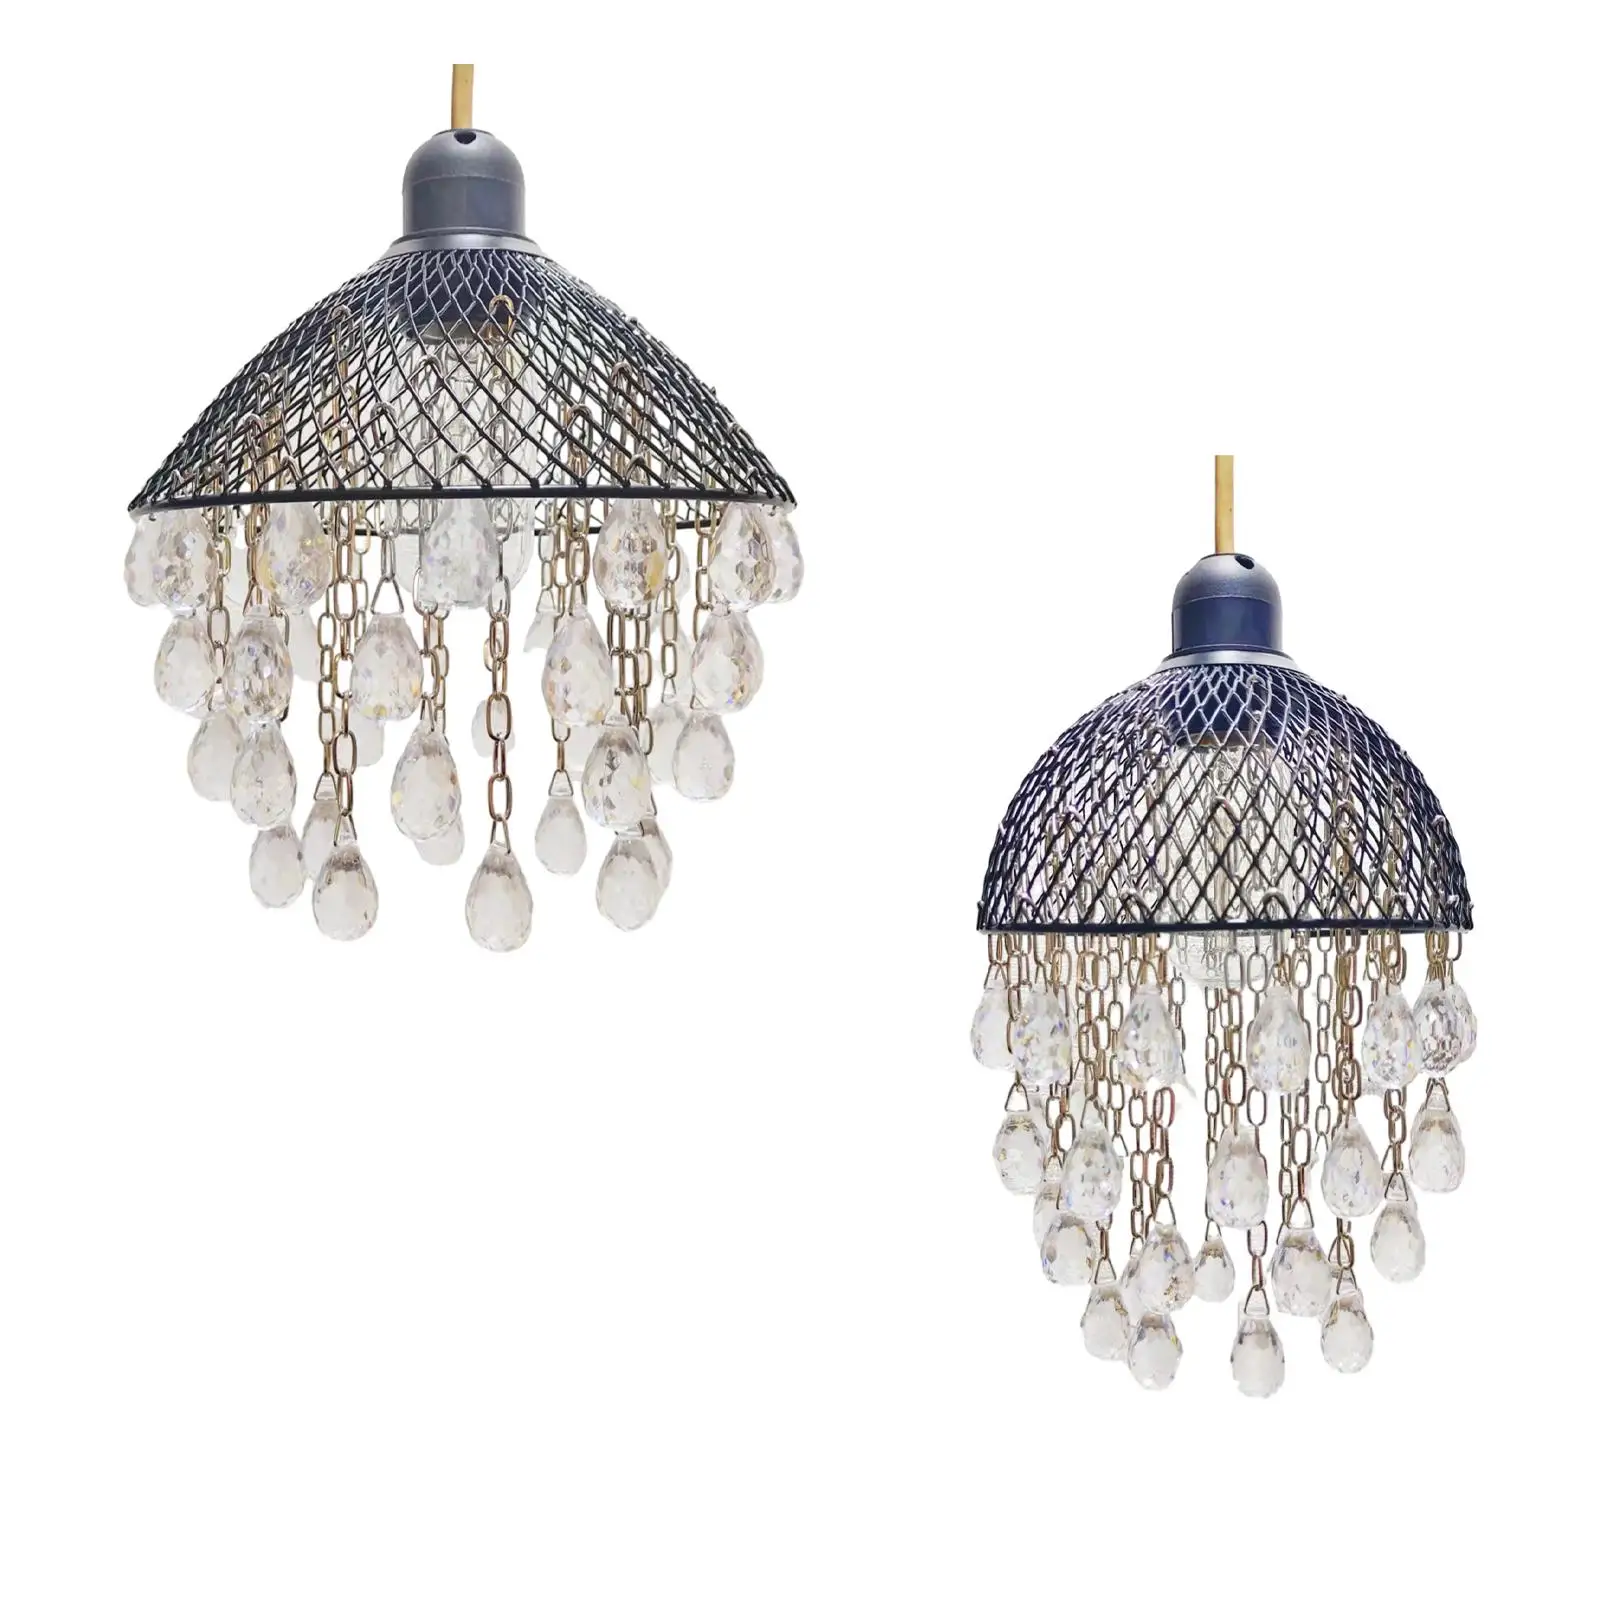 Beaded Lampshade Acrylic Chandelier Shade Modern Beaded Hanging Chandelier Shade for Bedroom Hallways Living Rooms Wedding Party